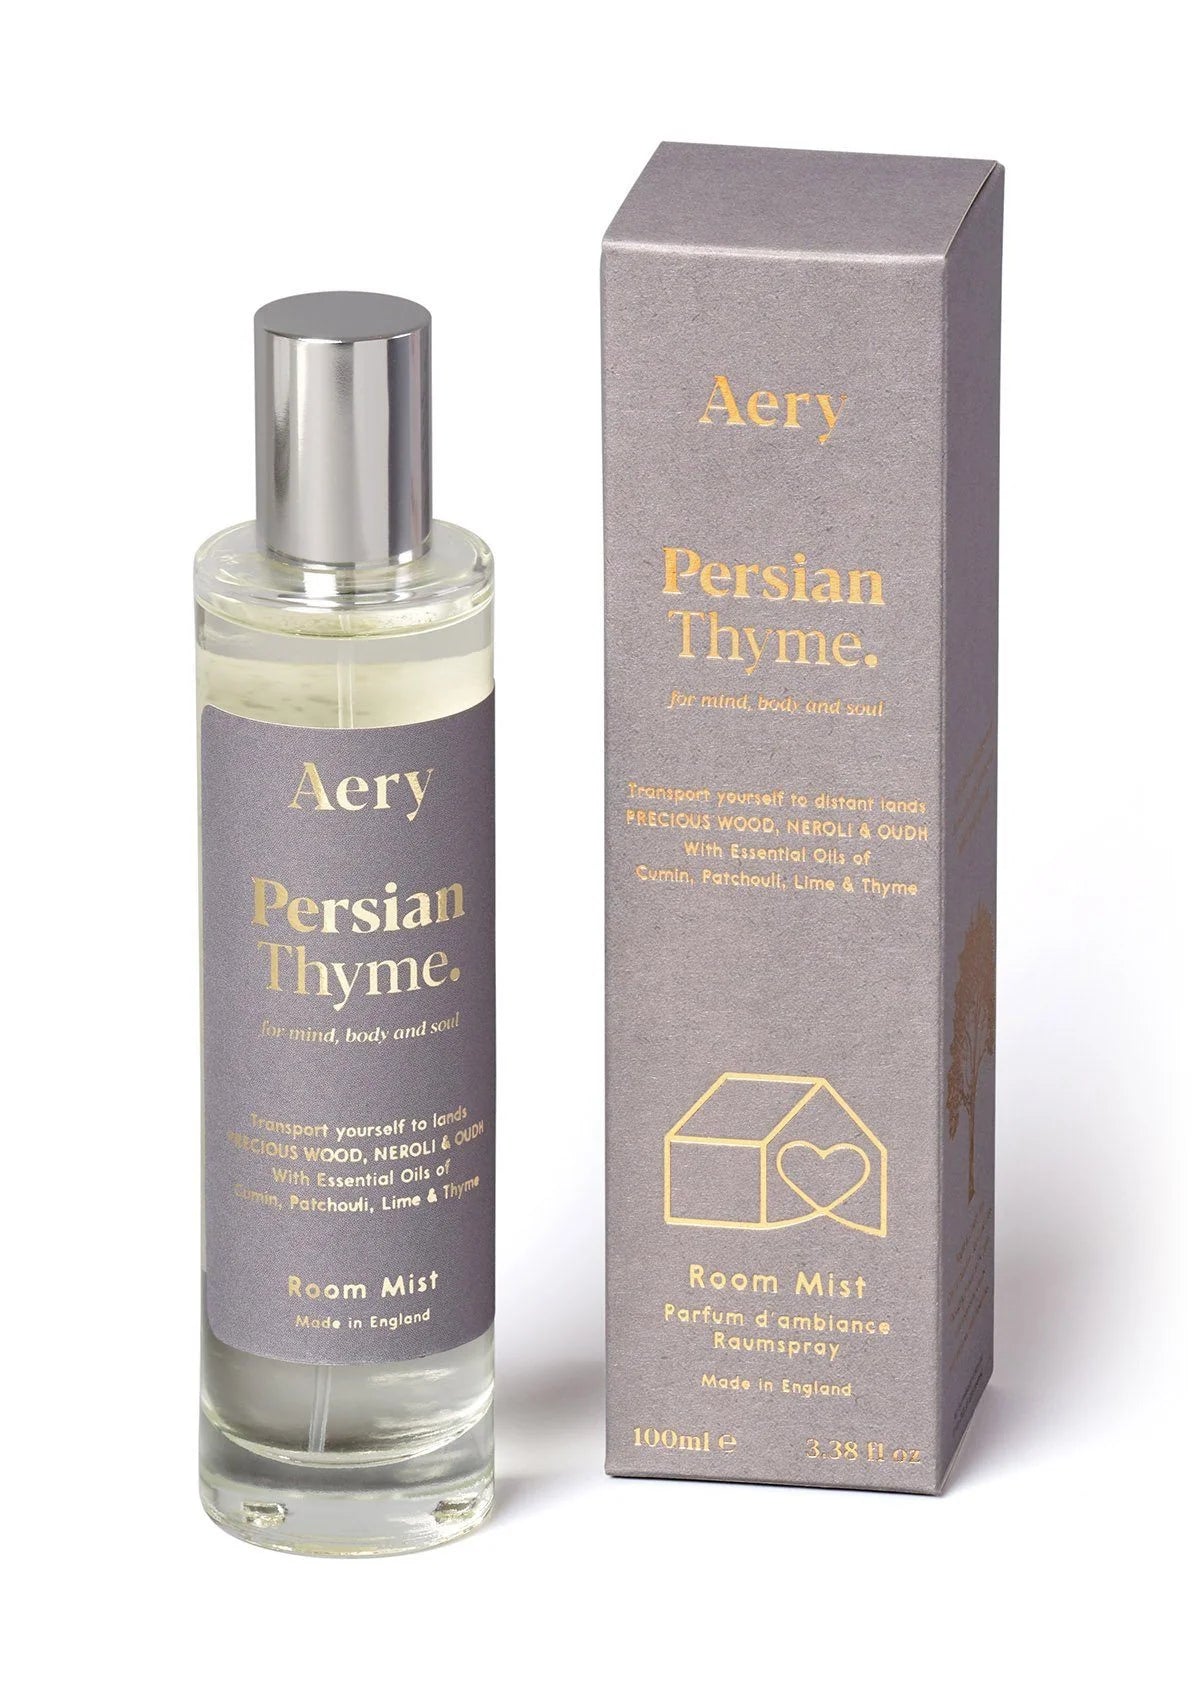 Persian Thyme Room Mist from Aery